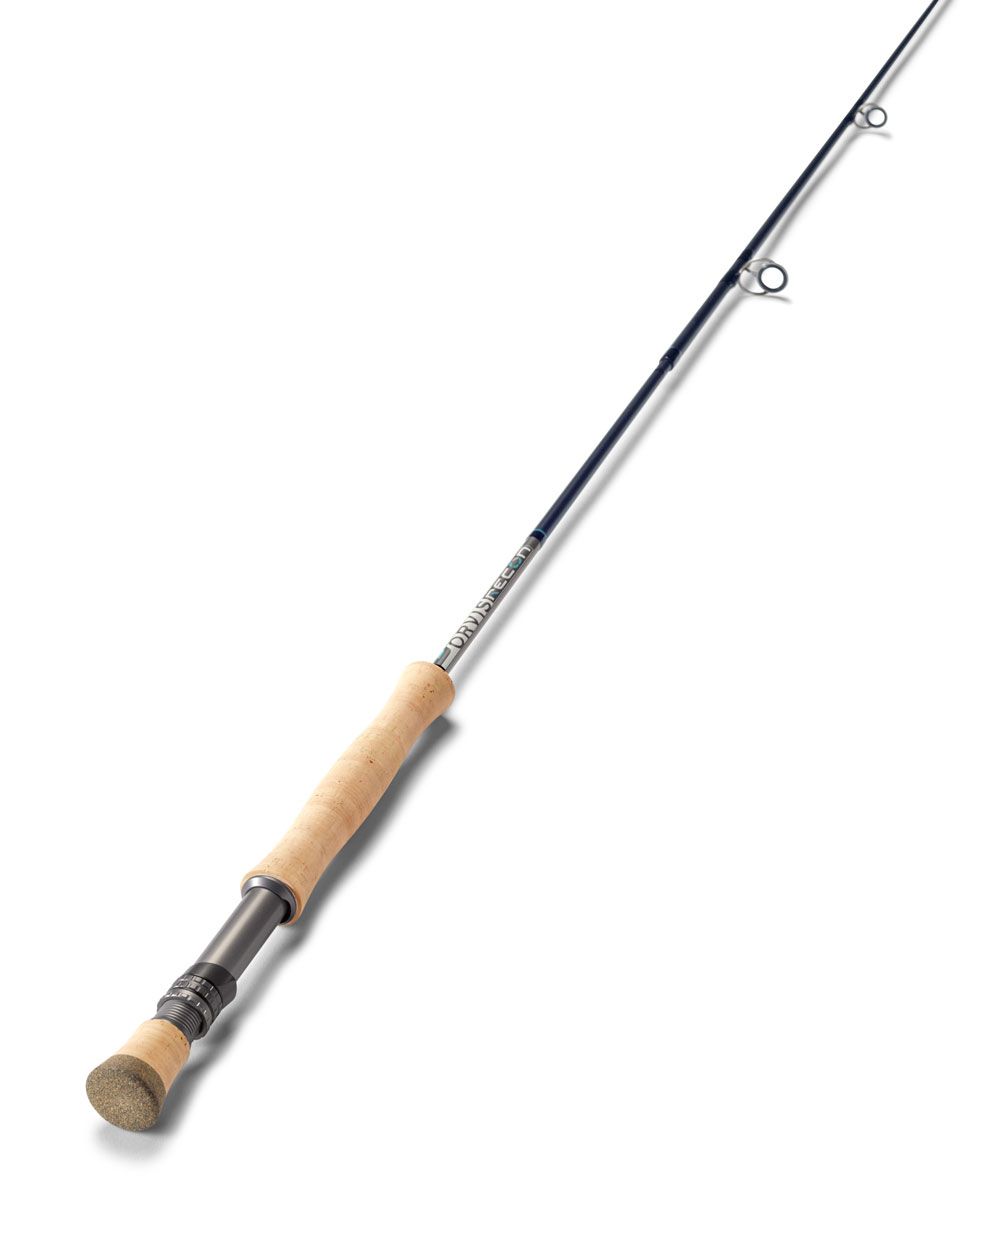 orvis ORVIS Recon Series Fly Rods | Feather-Craft Fly Fishing